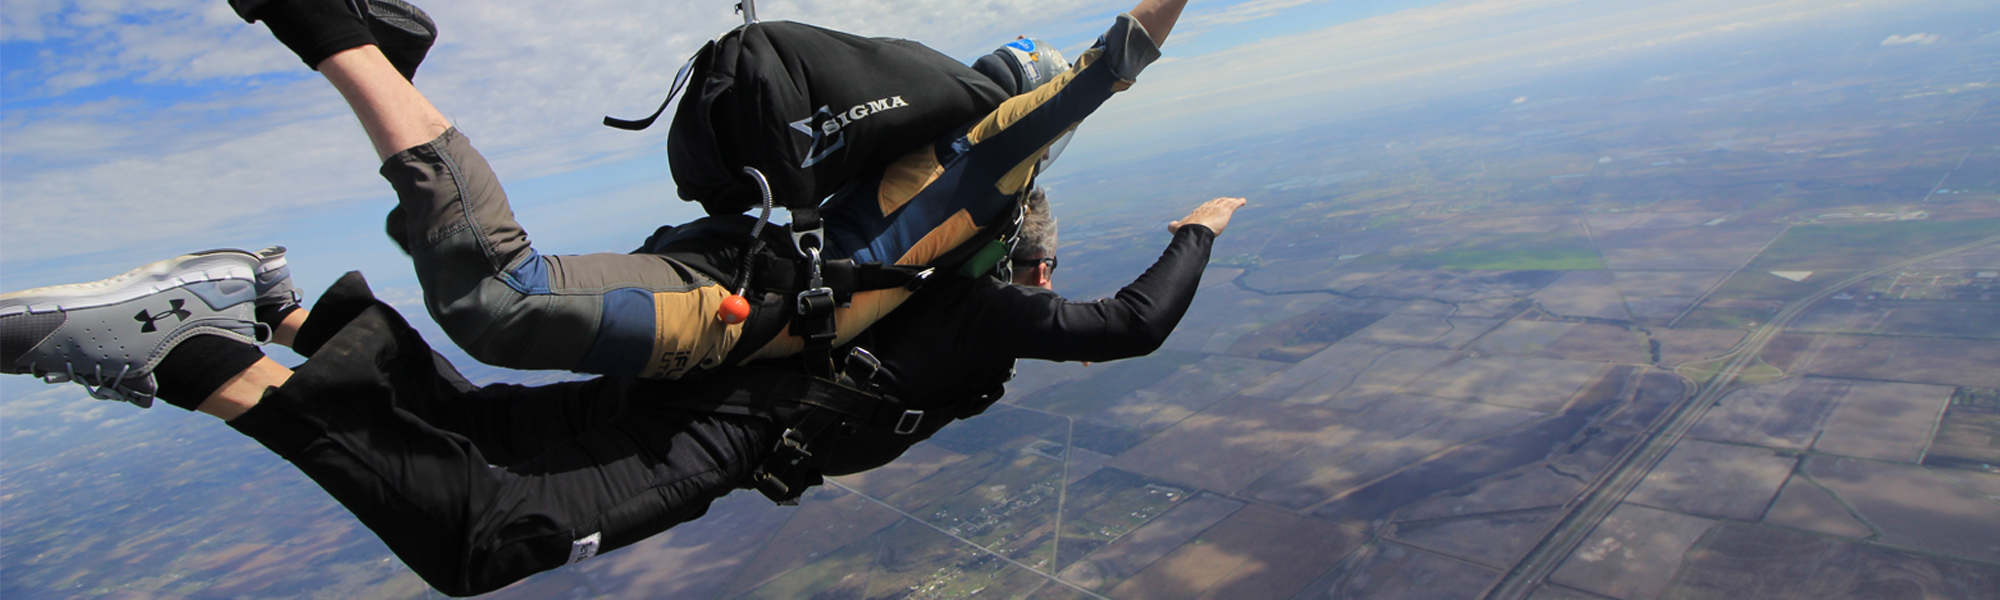 Tandem Skydiving Common Questions Skydive Spaceland Dallas